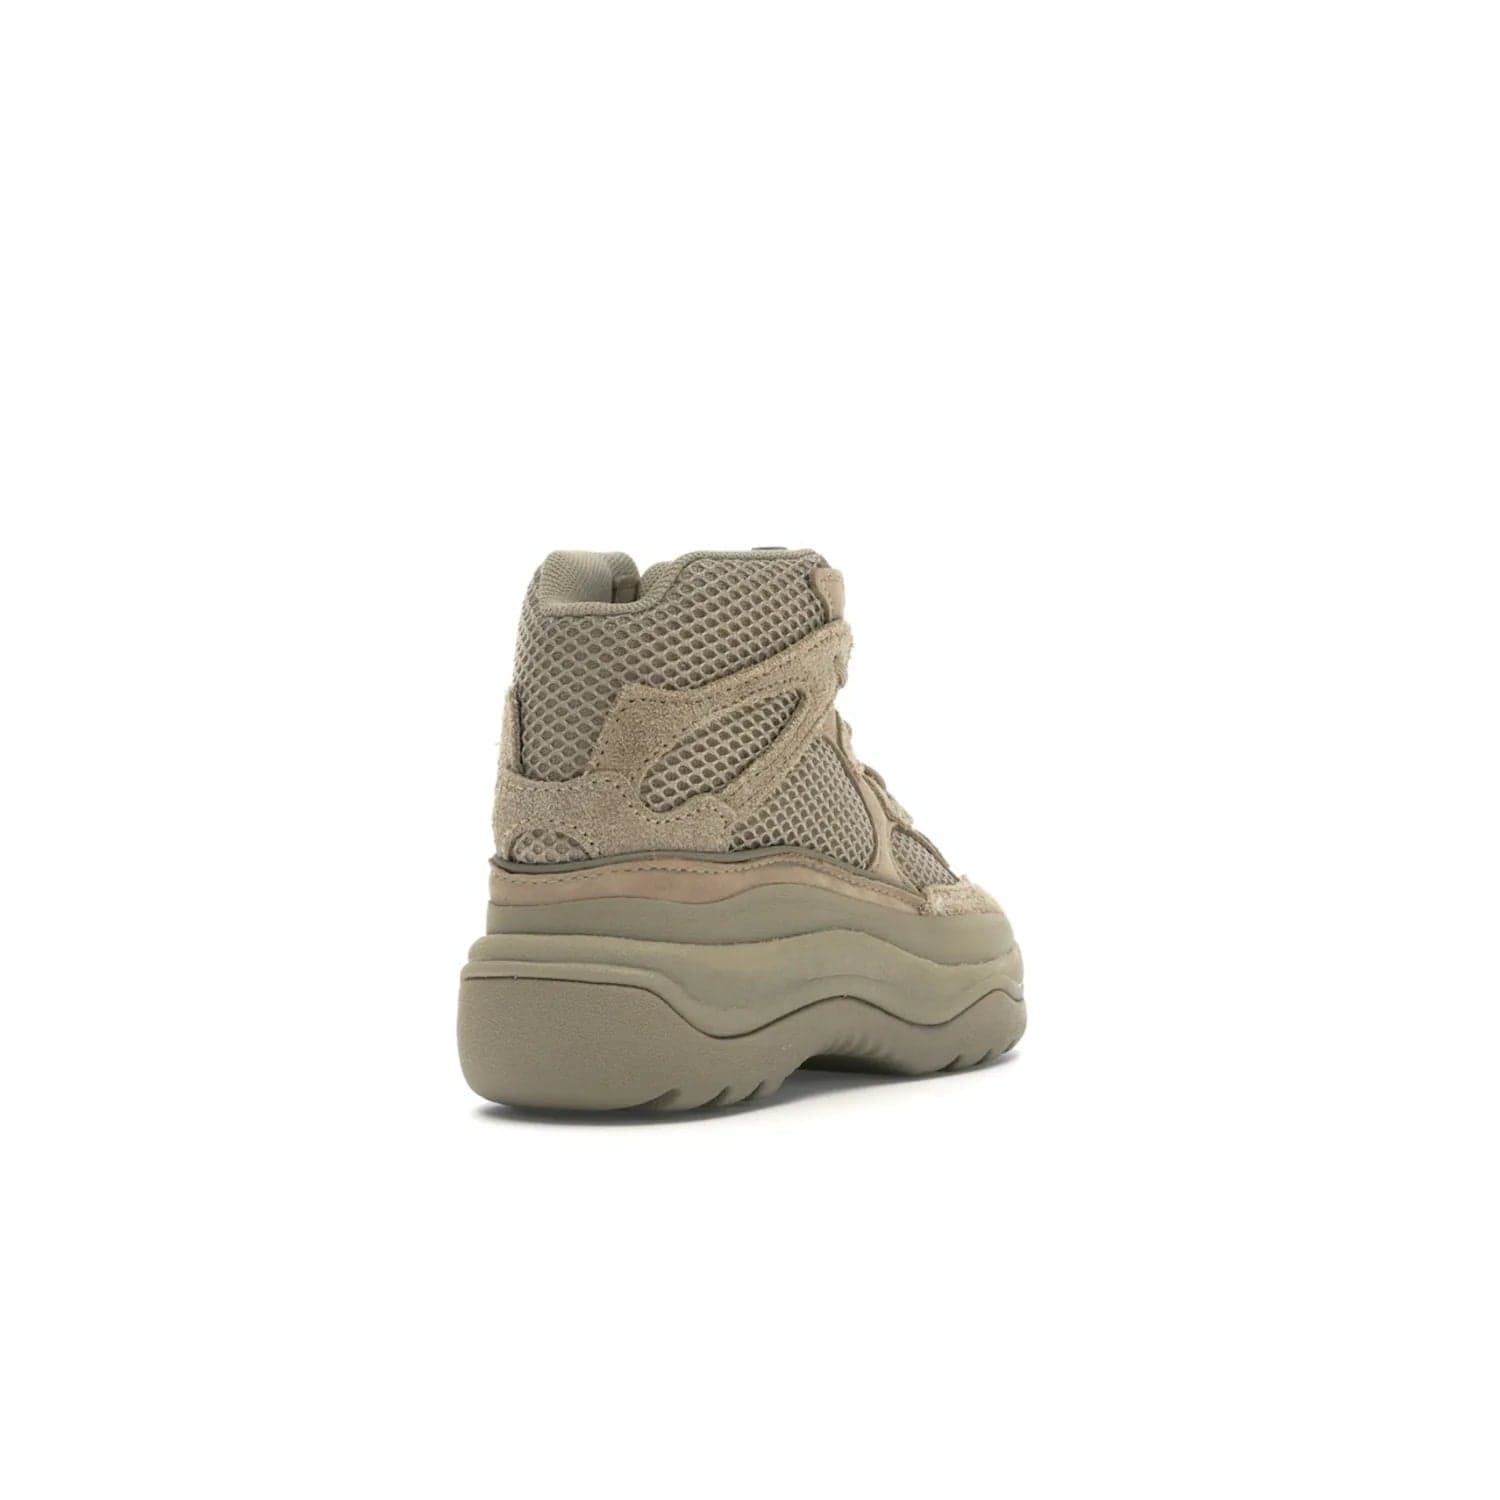 adidas Yeezy Desert Boot Rock (Kids) - Image 31 - Only at www.BallersClubKickz.com - Elevate your style this season with the adidas Yeezy Desert Boot Rock. Crafted from layered nylon and suede, this chic kids' silhouette features an EVA midsole and rubber outsole for superior cushioning and traction.